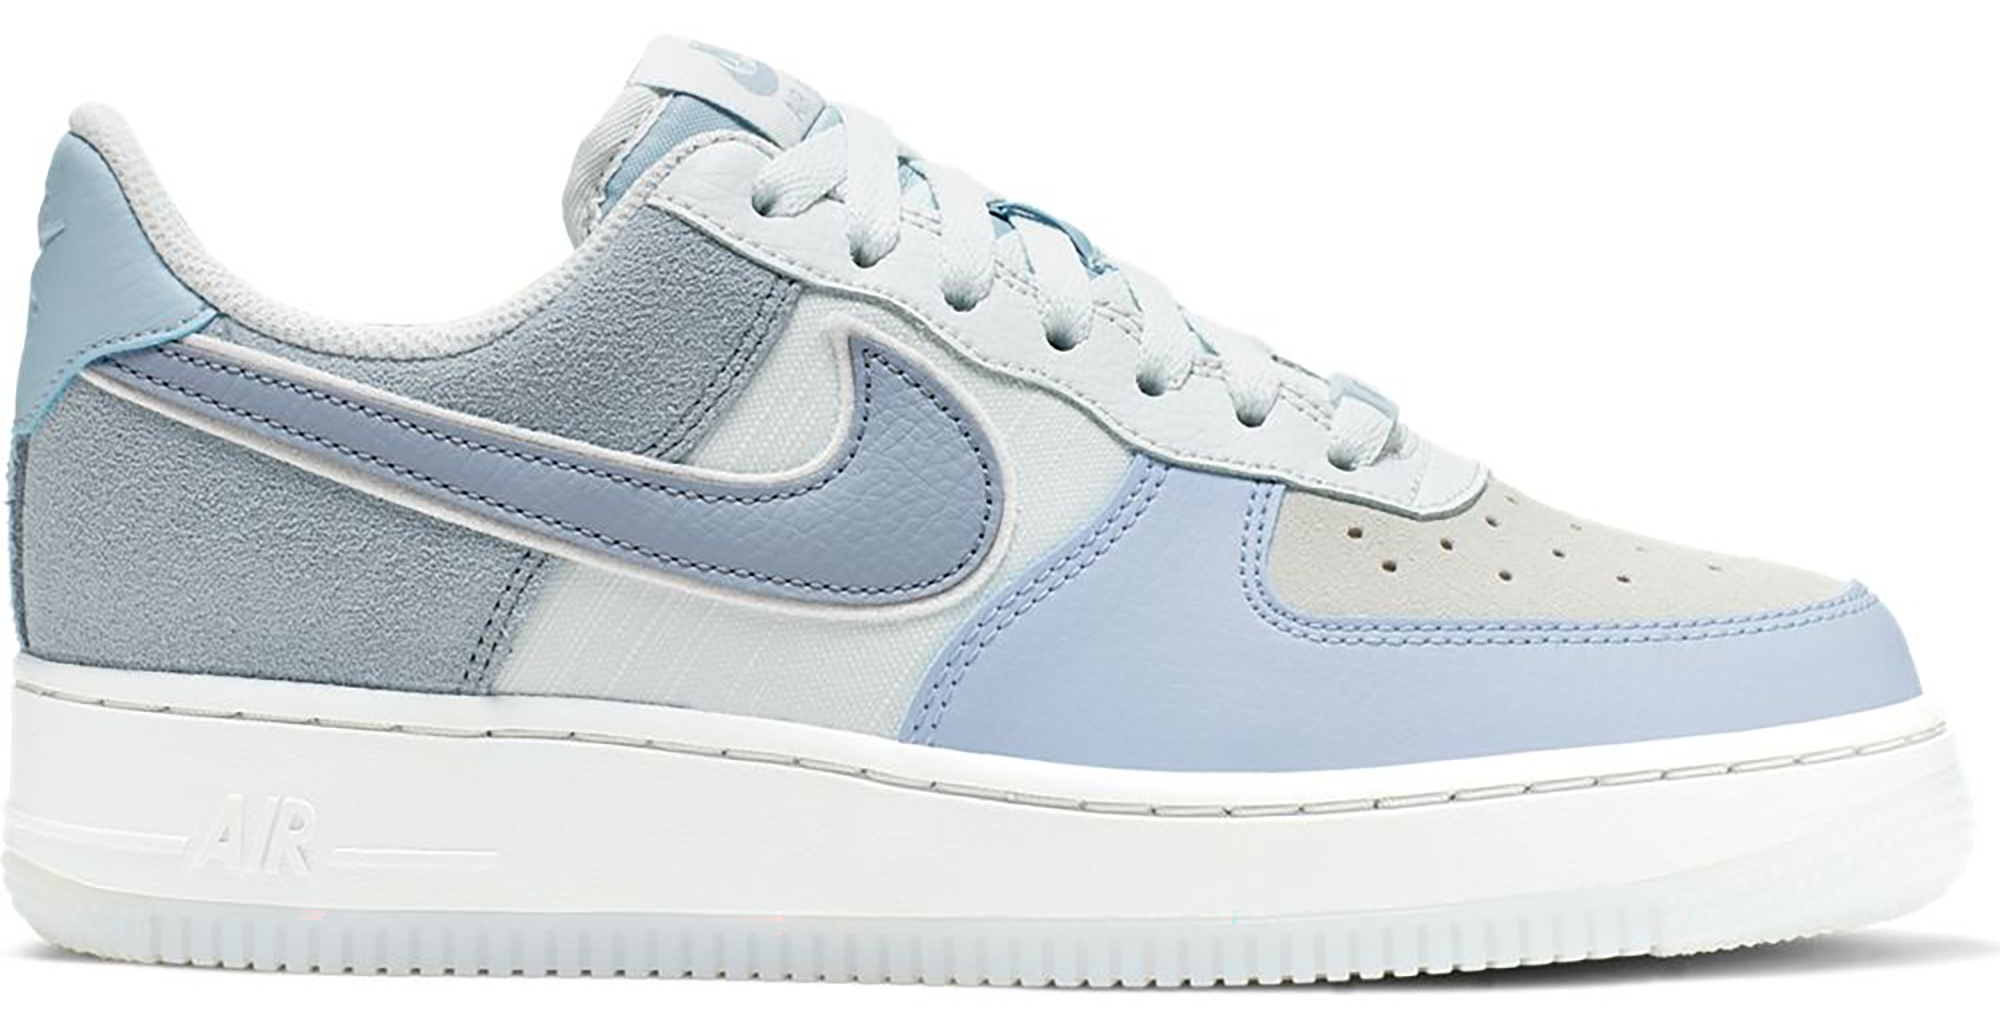 Nike Air Force 1 Low Light Armory Blue 